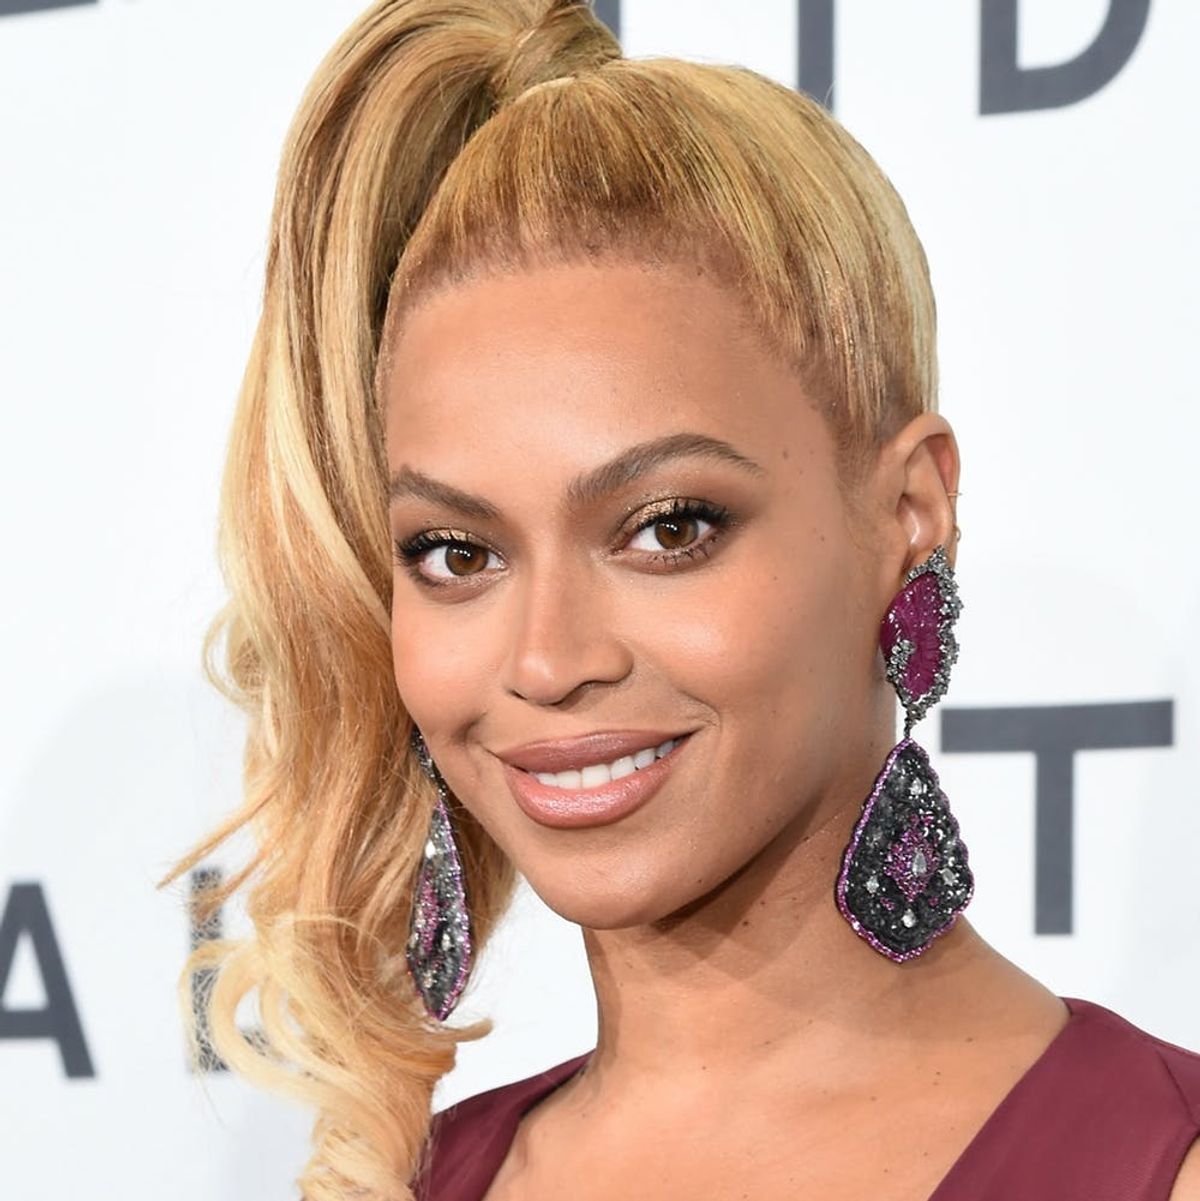 Stop Everything: Beyonce Just Released a New Album